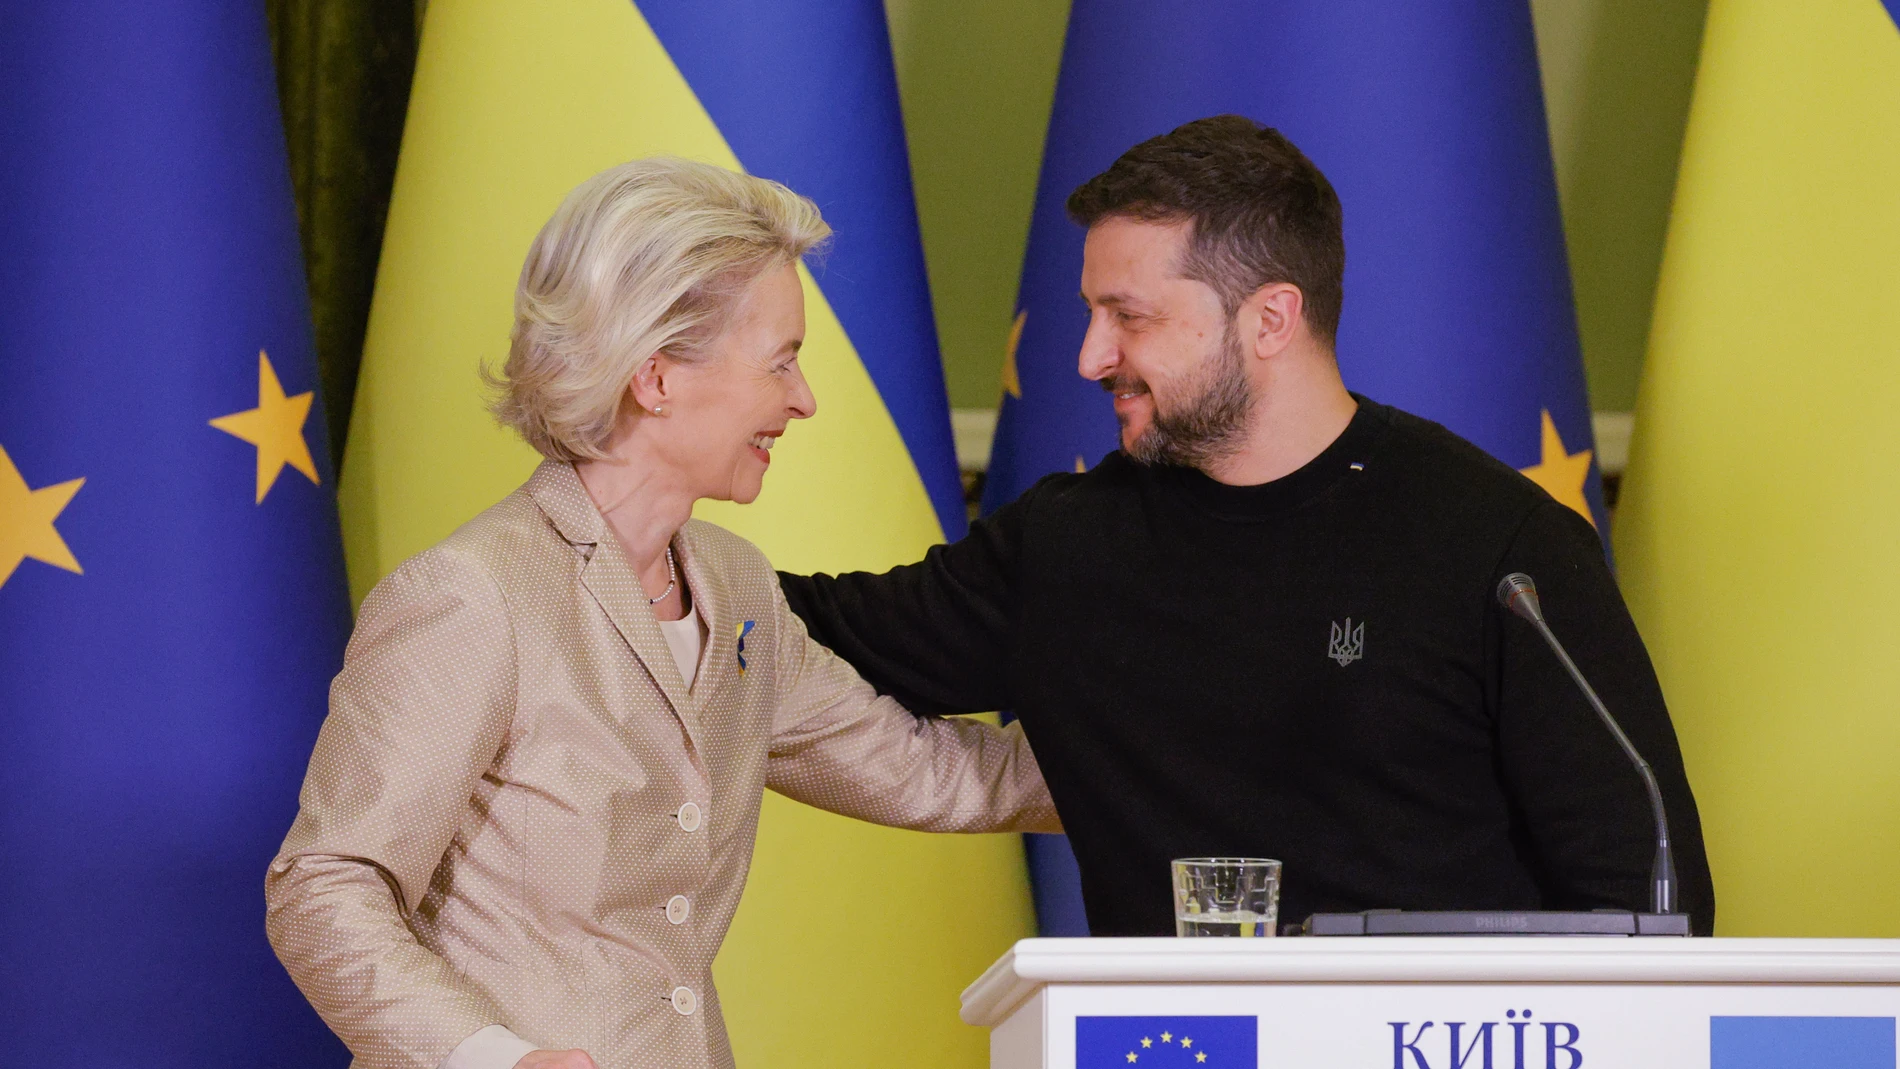 Kyiv (Ukraine), 04/11/2023.- Ukraine's President Volodymyr Zelensky (R) and President of the European Commission Ursula von der Leyen (L) react as they address a joint press conference following their meeting in Kyiv, Ukraine, 04 November 2023. Von der Leyen arrived in Kyiv to meet with top Ukrainian officials amid the Russian invasion. (Rusia, Ucrania, Kiev) EFE/EPA/SERGEY DOLZHENKO 33483 